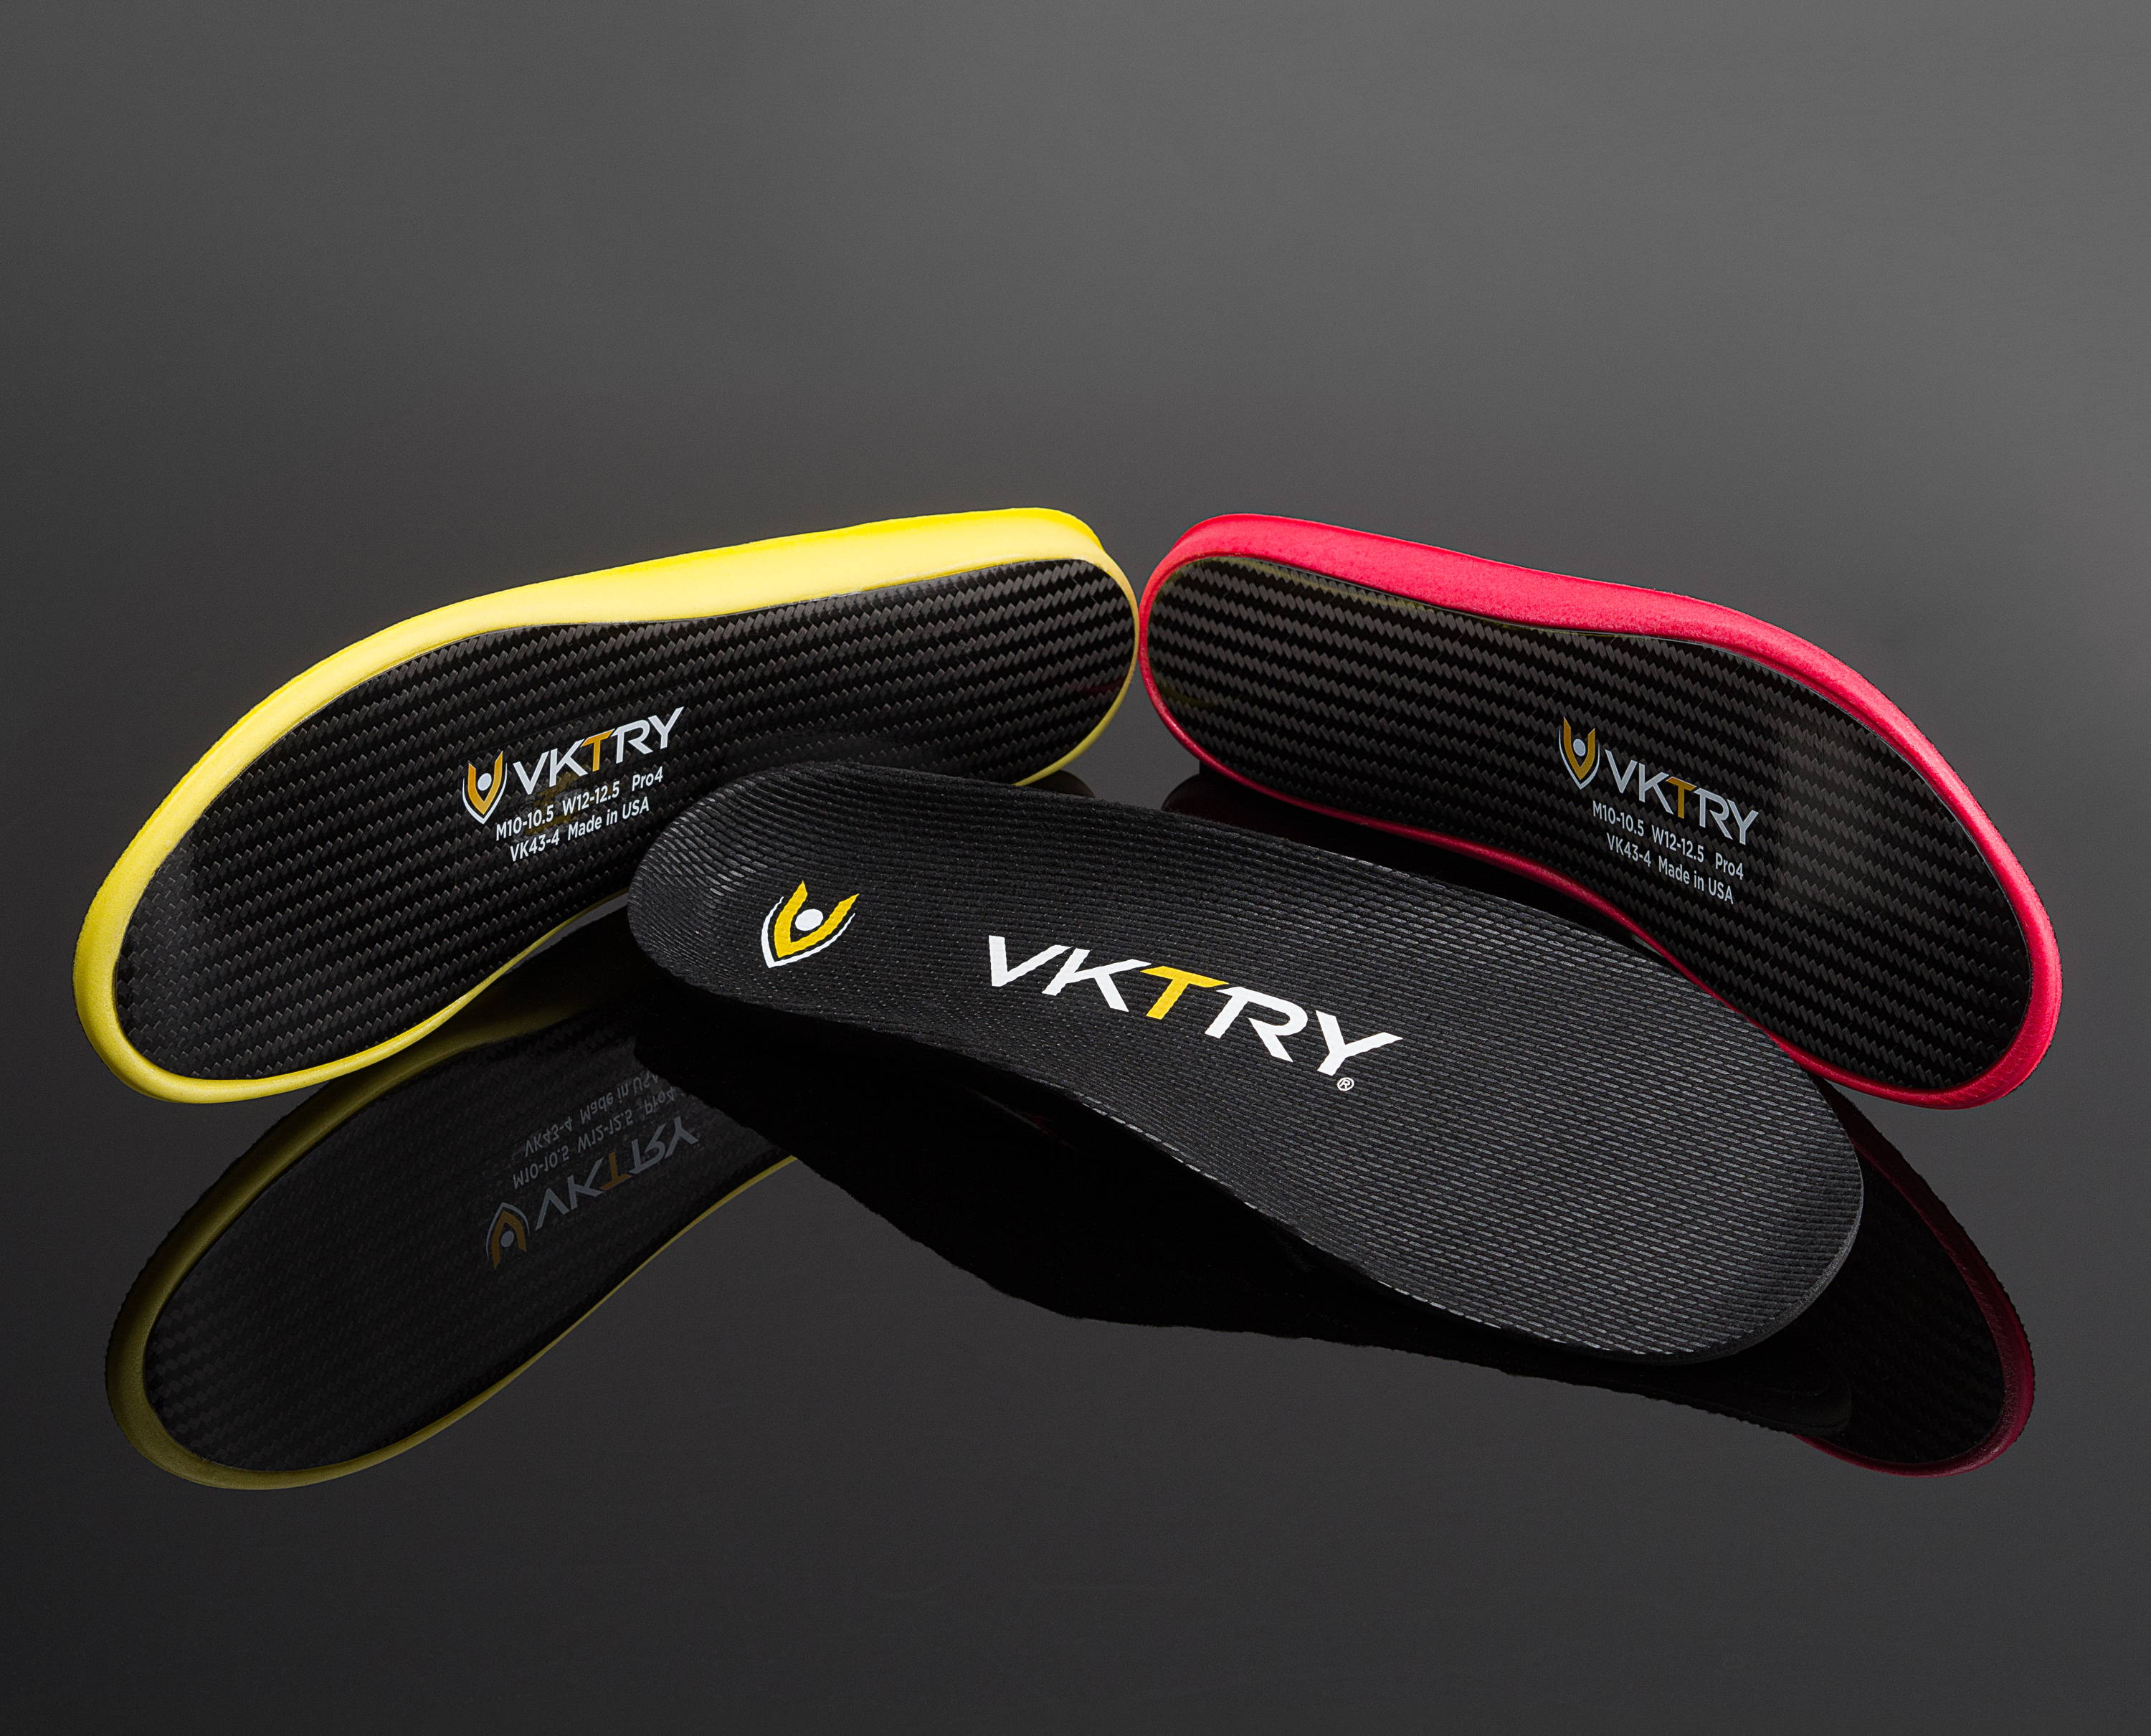 vktry insoles for shin splints and injruies